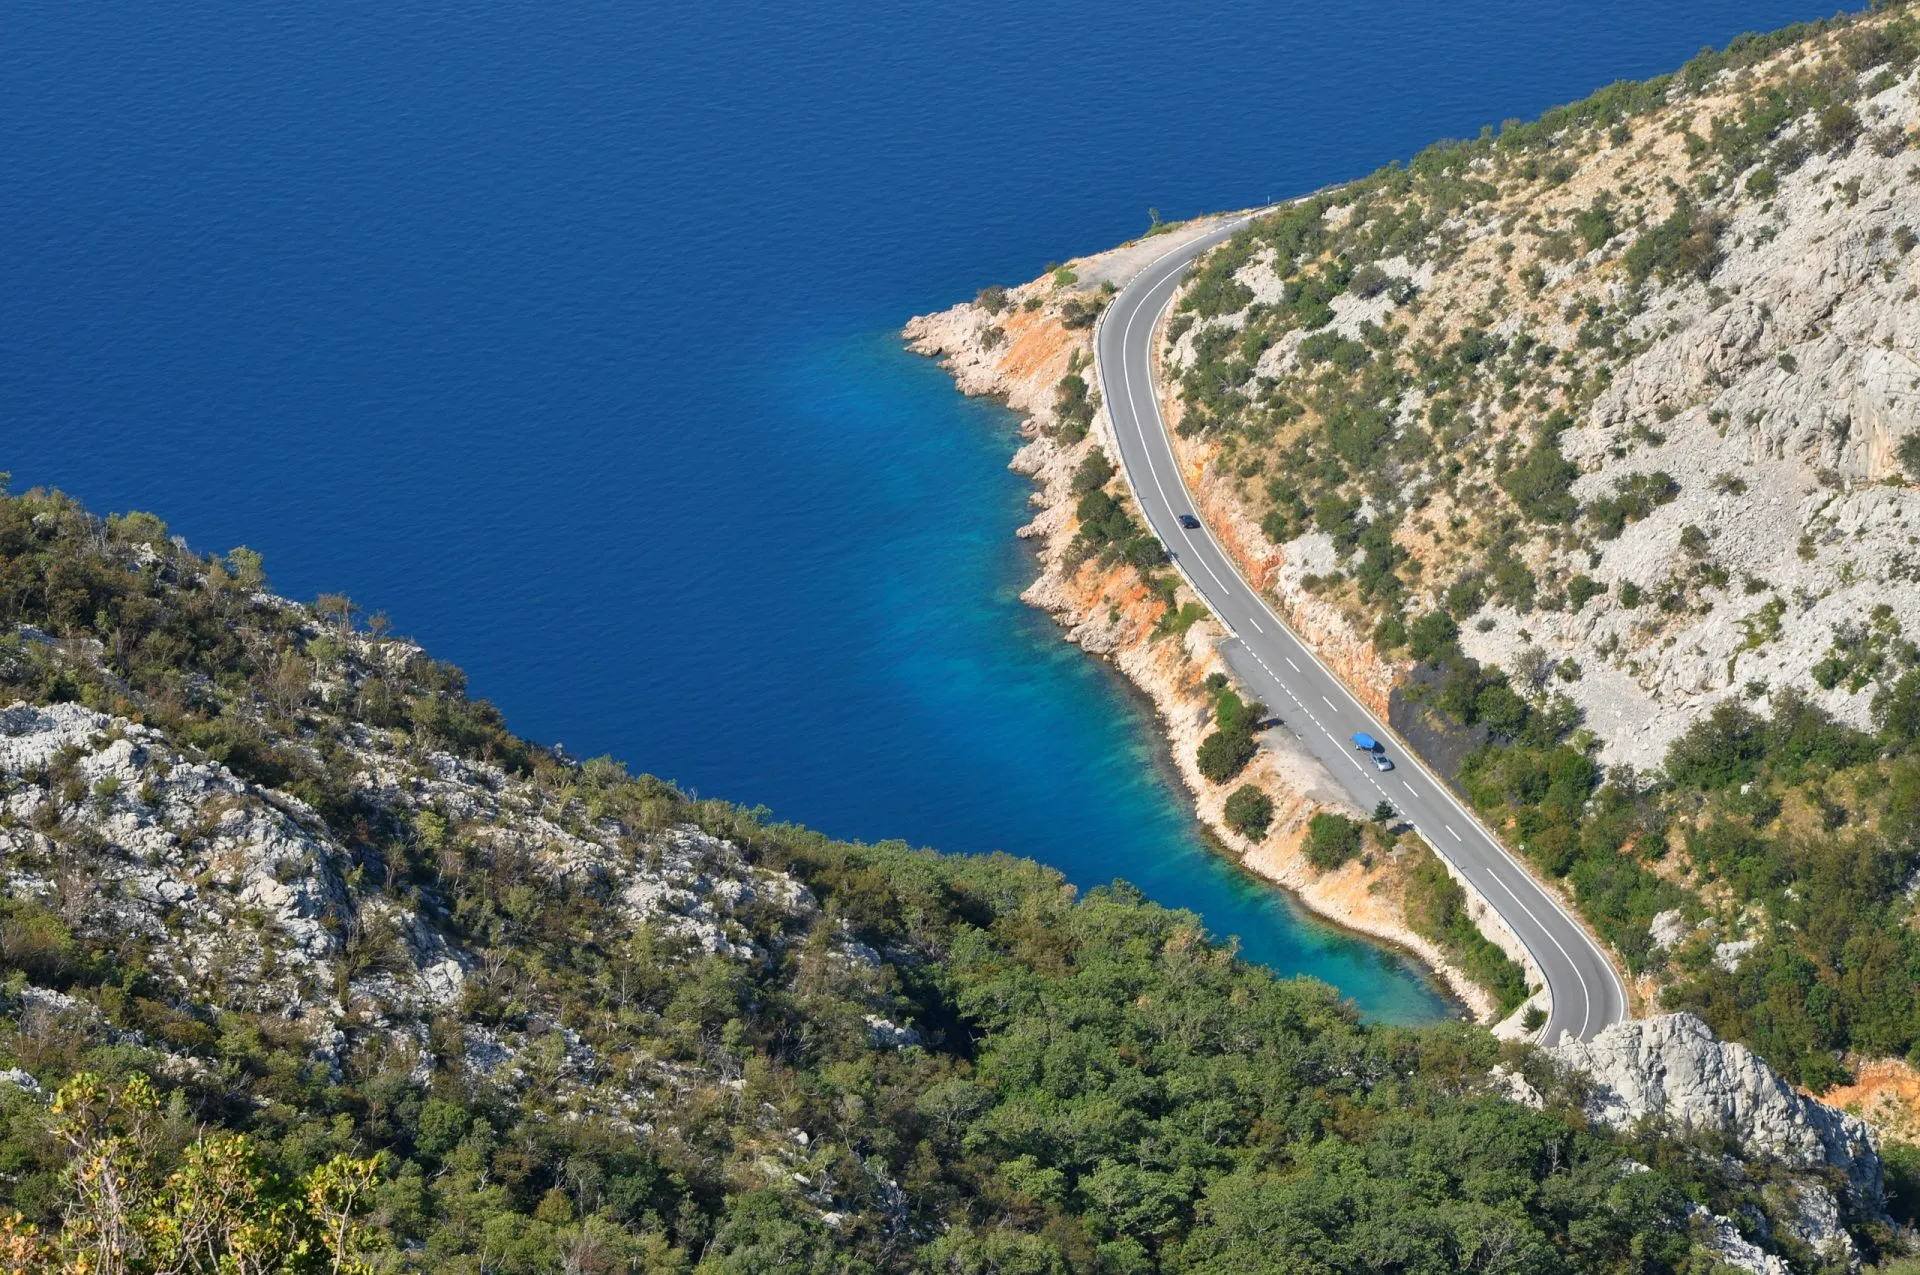 Aerial view of a winding coastal road and sea